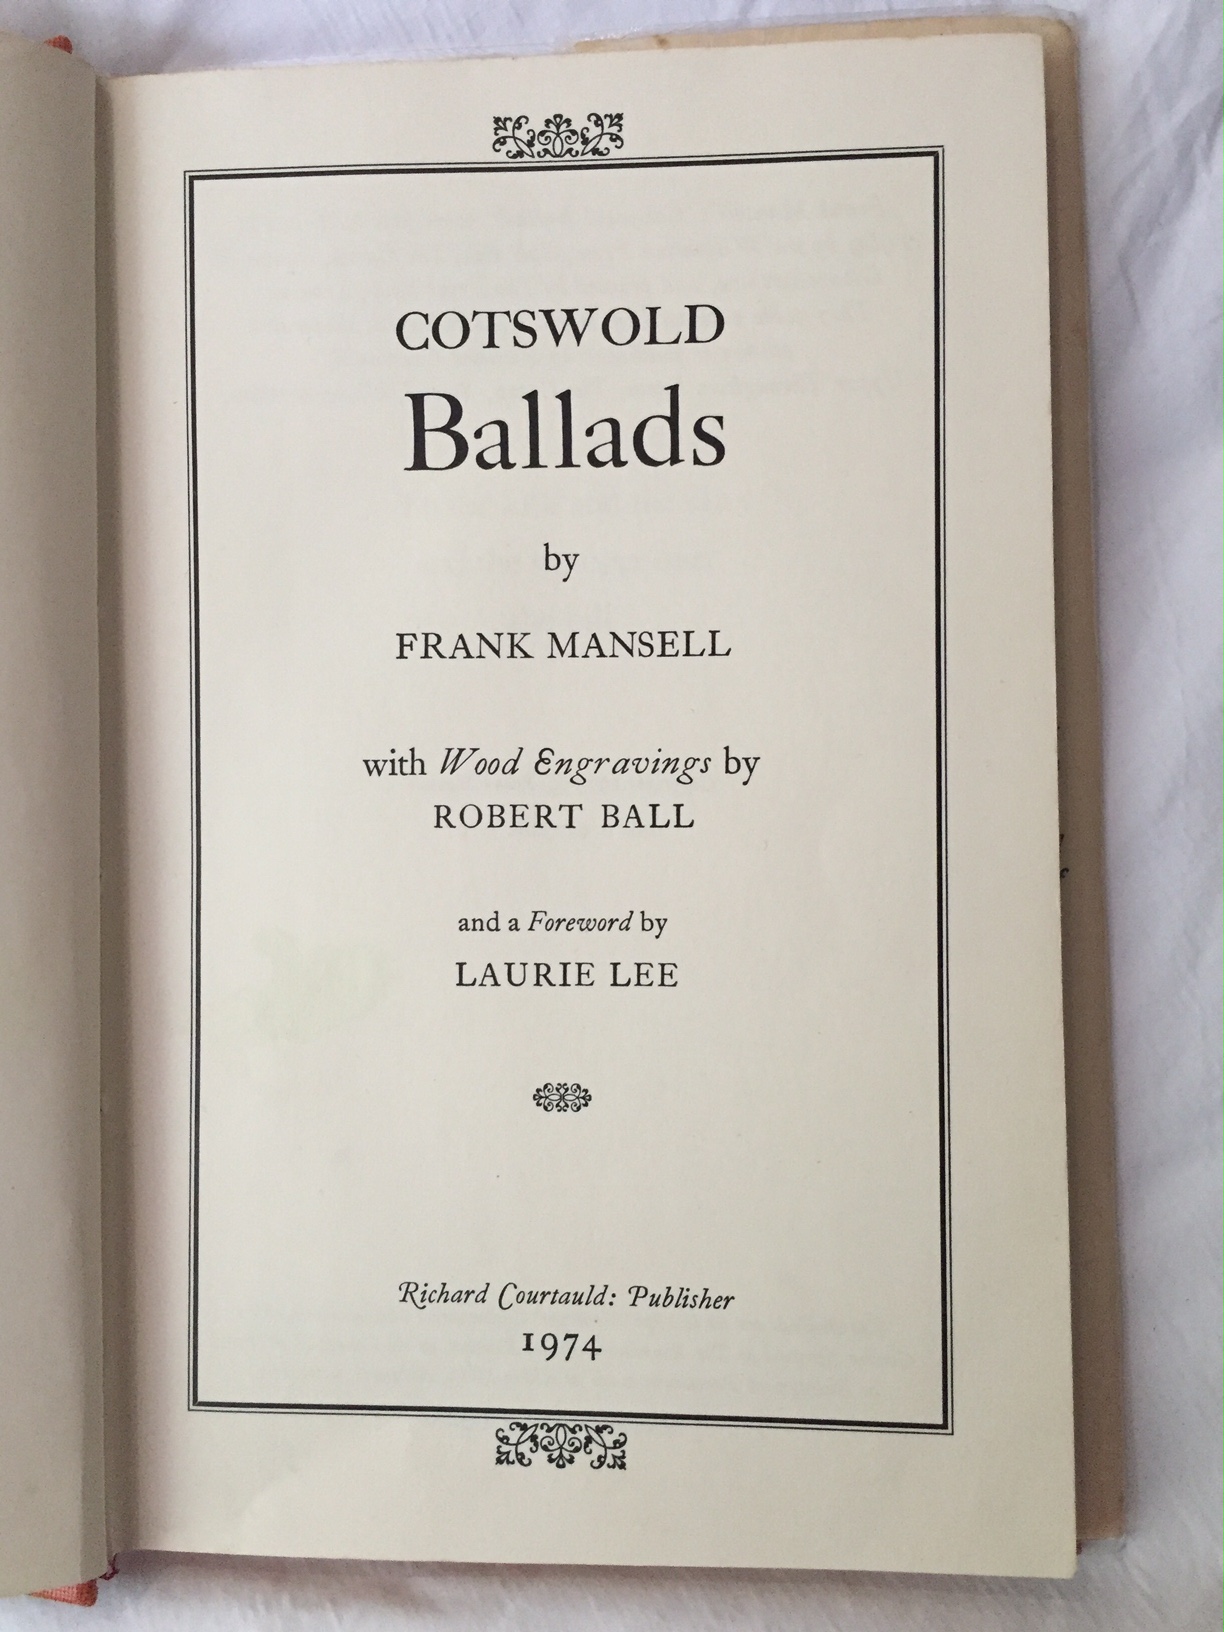 Frank Mansell - Cotswold Ballads